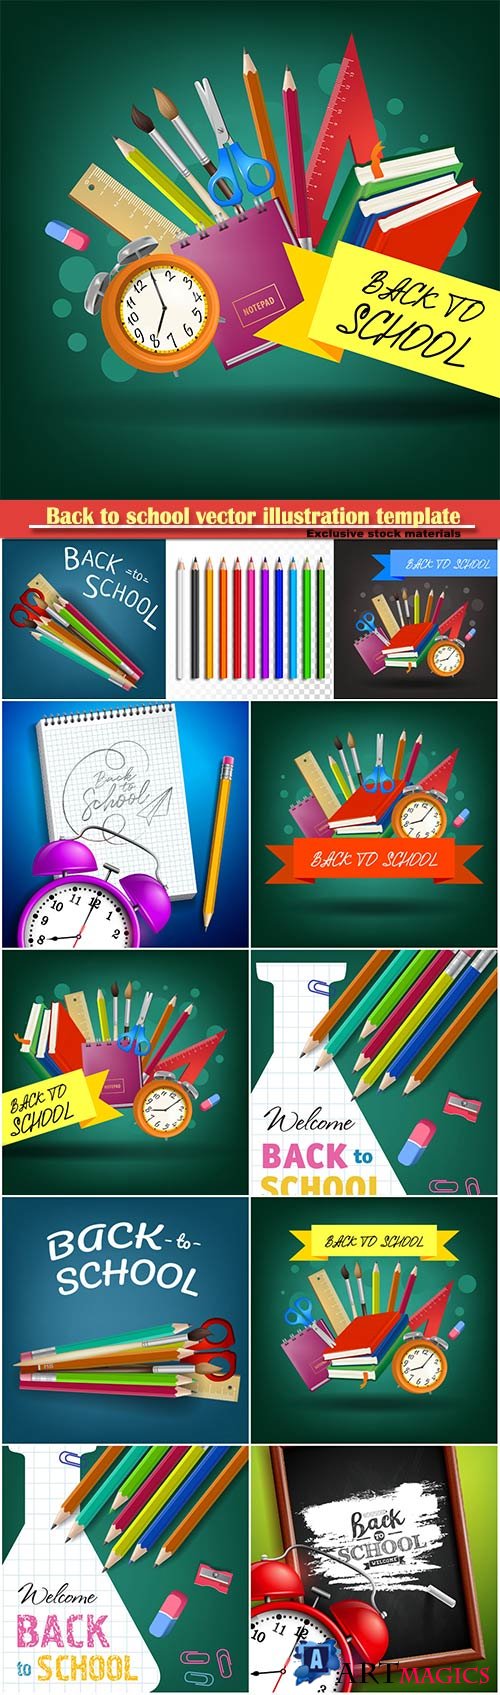 Back to school vector illustration template # 11